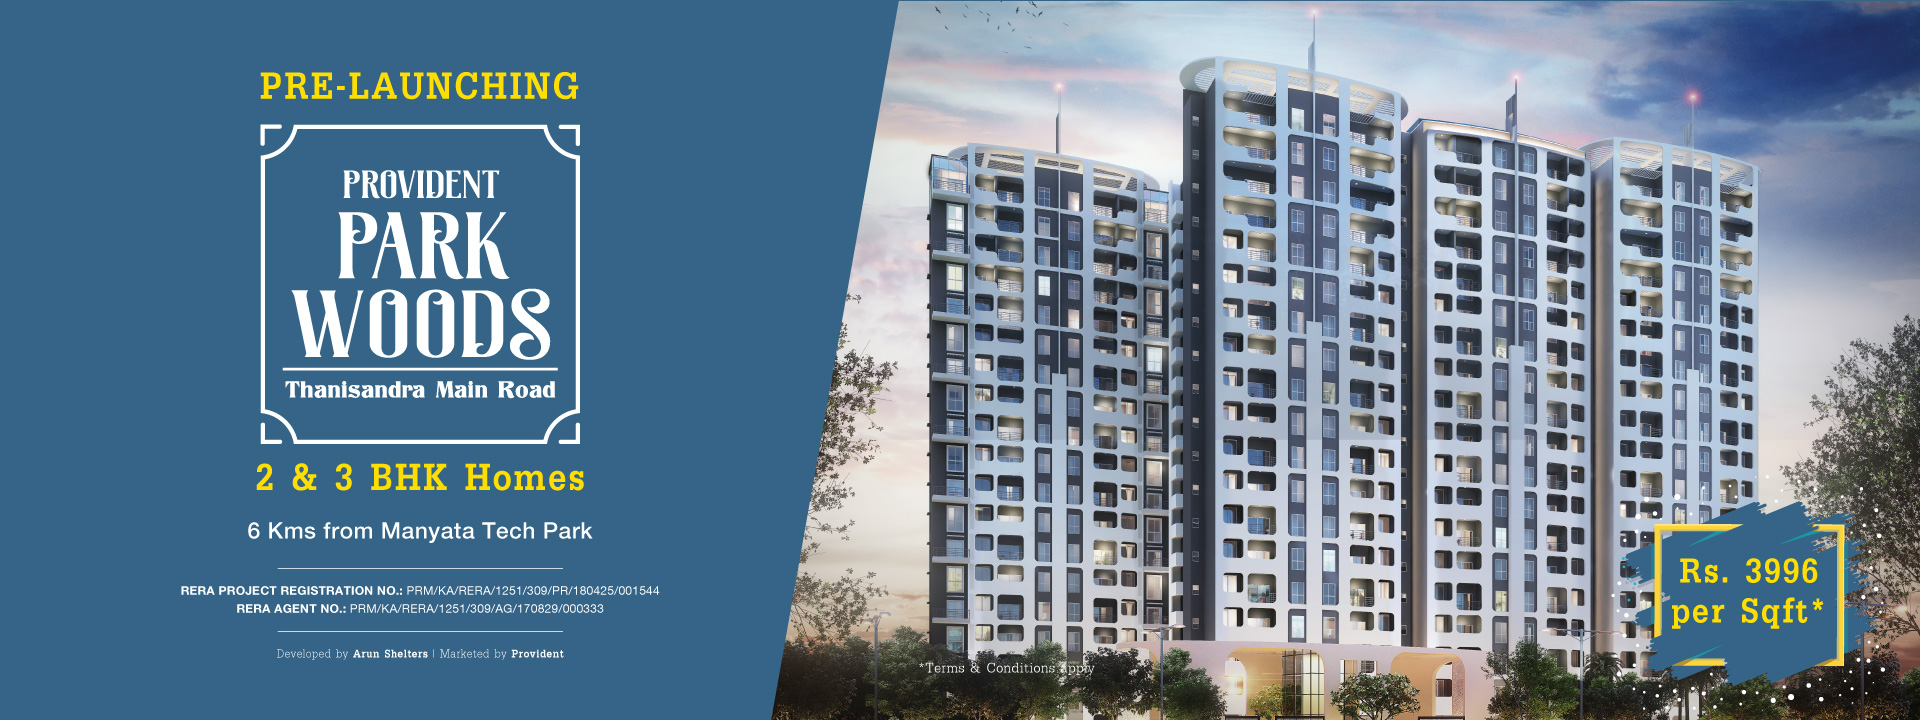 Pre launching of 2 & 3 bhk homes at Rs. 3996 per sq.ft. at Provident Park Woods Bangalore Update